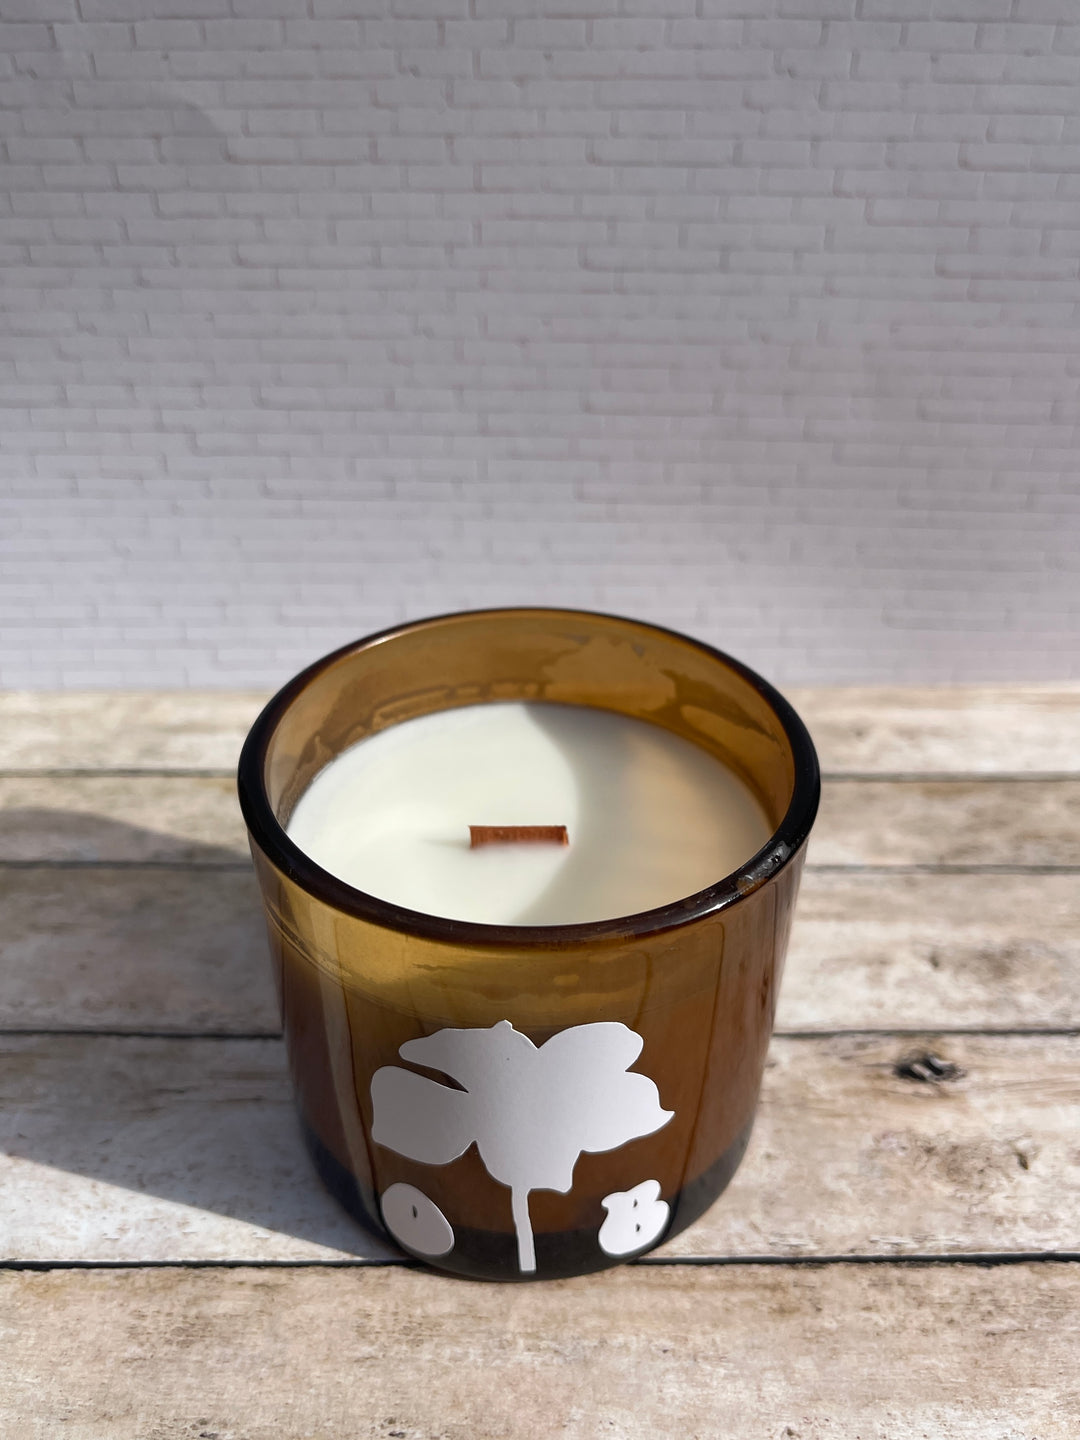 The Coconut Cream Soy Candle